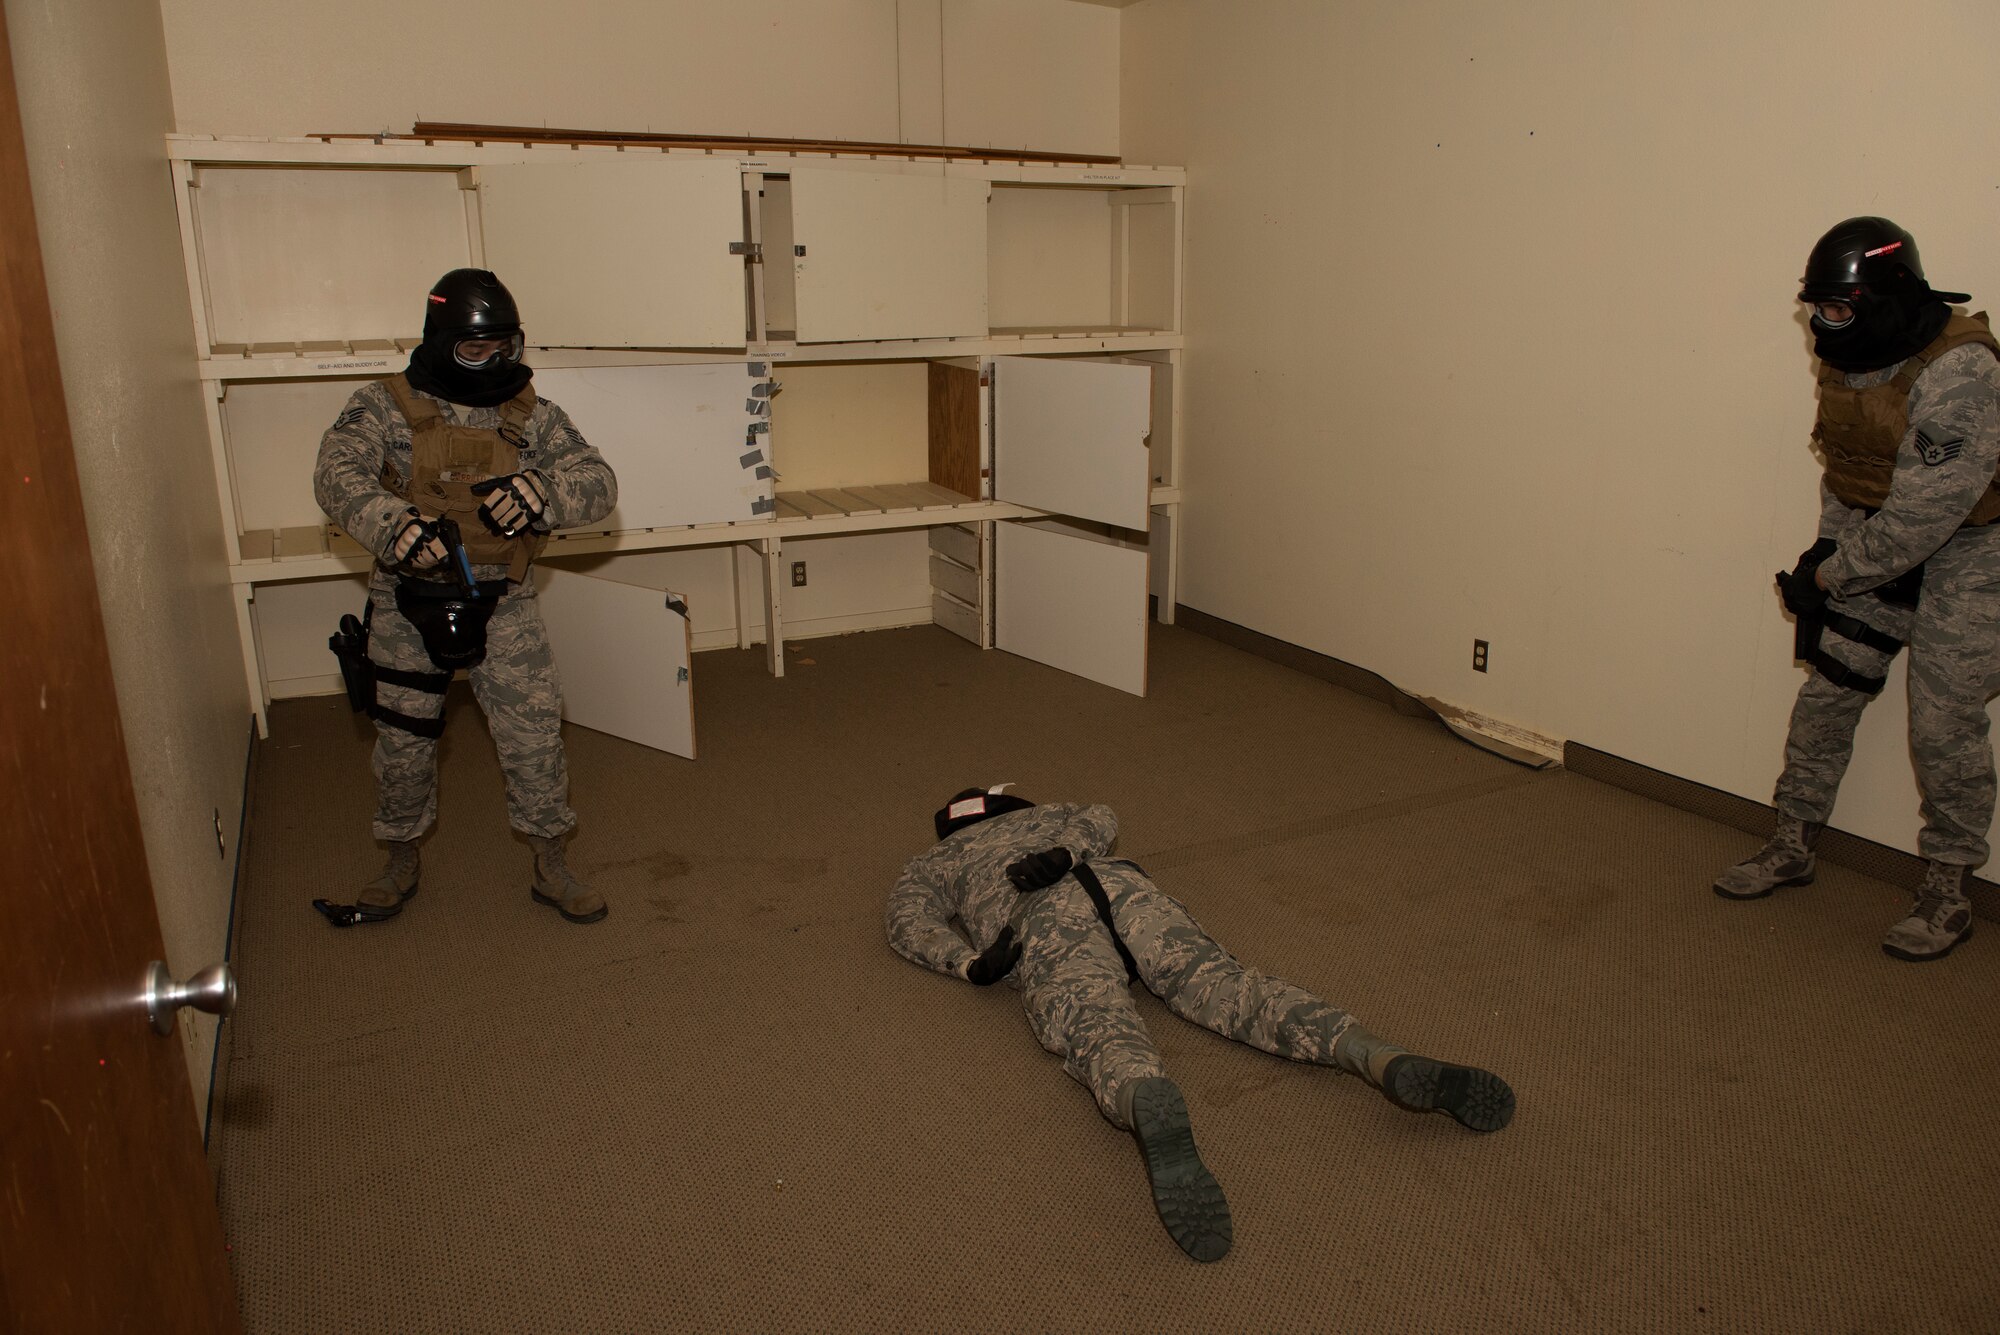 Airmen assigned to the 60th Security Forces Squadron conduct use of force training Feb 7, 2019 at Travis Air Force Base, Calif. Security forces Airmen train regularly to be ready for a variety of scenarios. (U.S. Air Force photo by Tech. Sgt. James Hodgman)